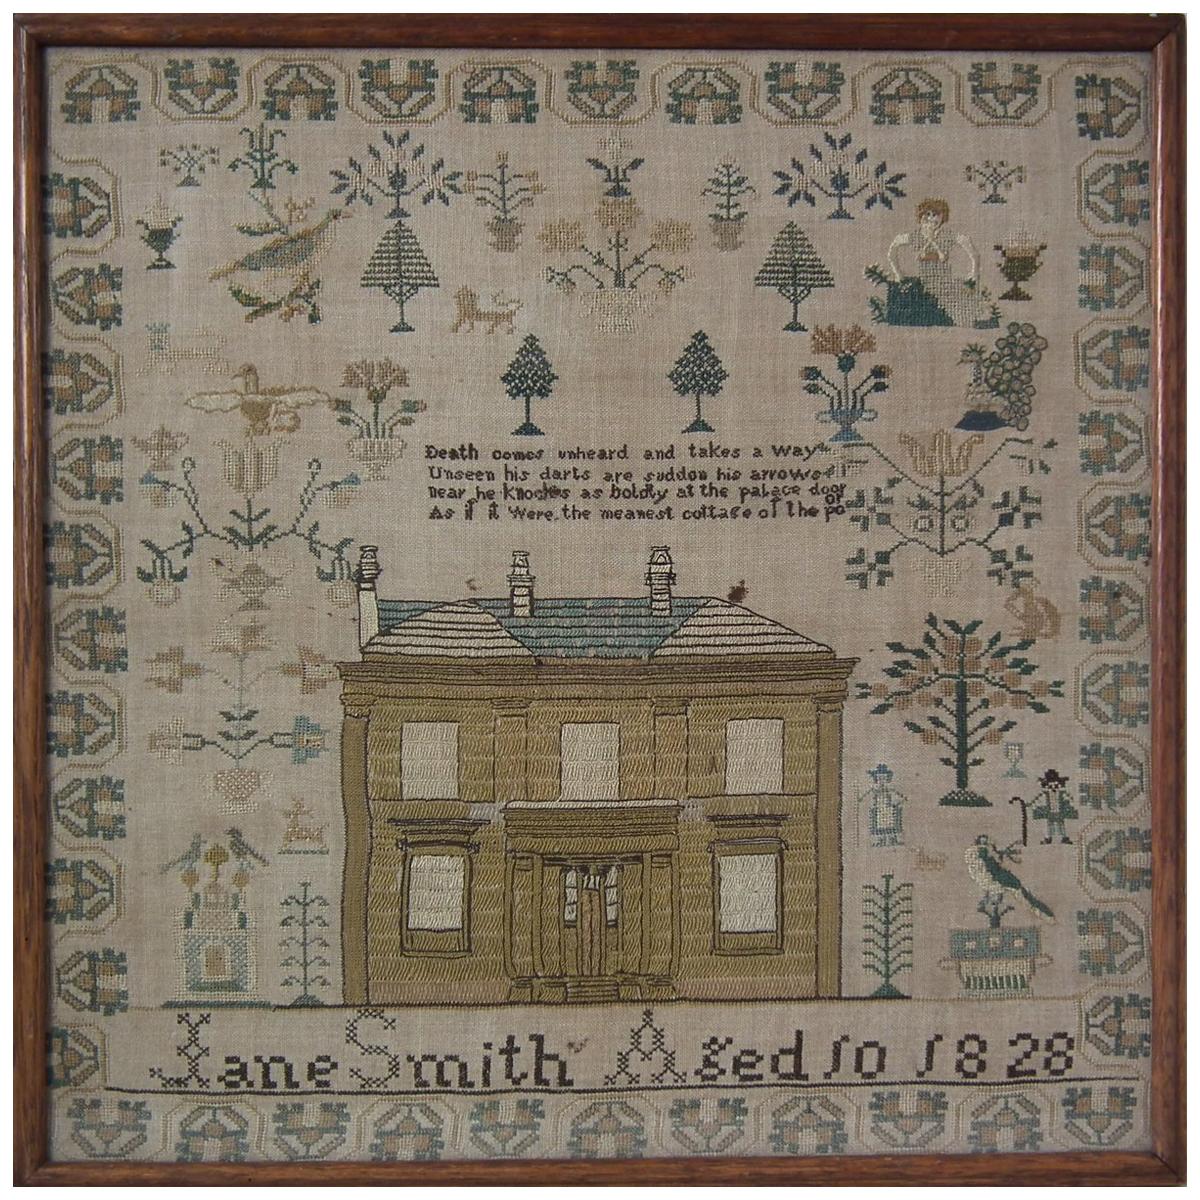 House Sampler, 1828 by Jane Smith